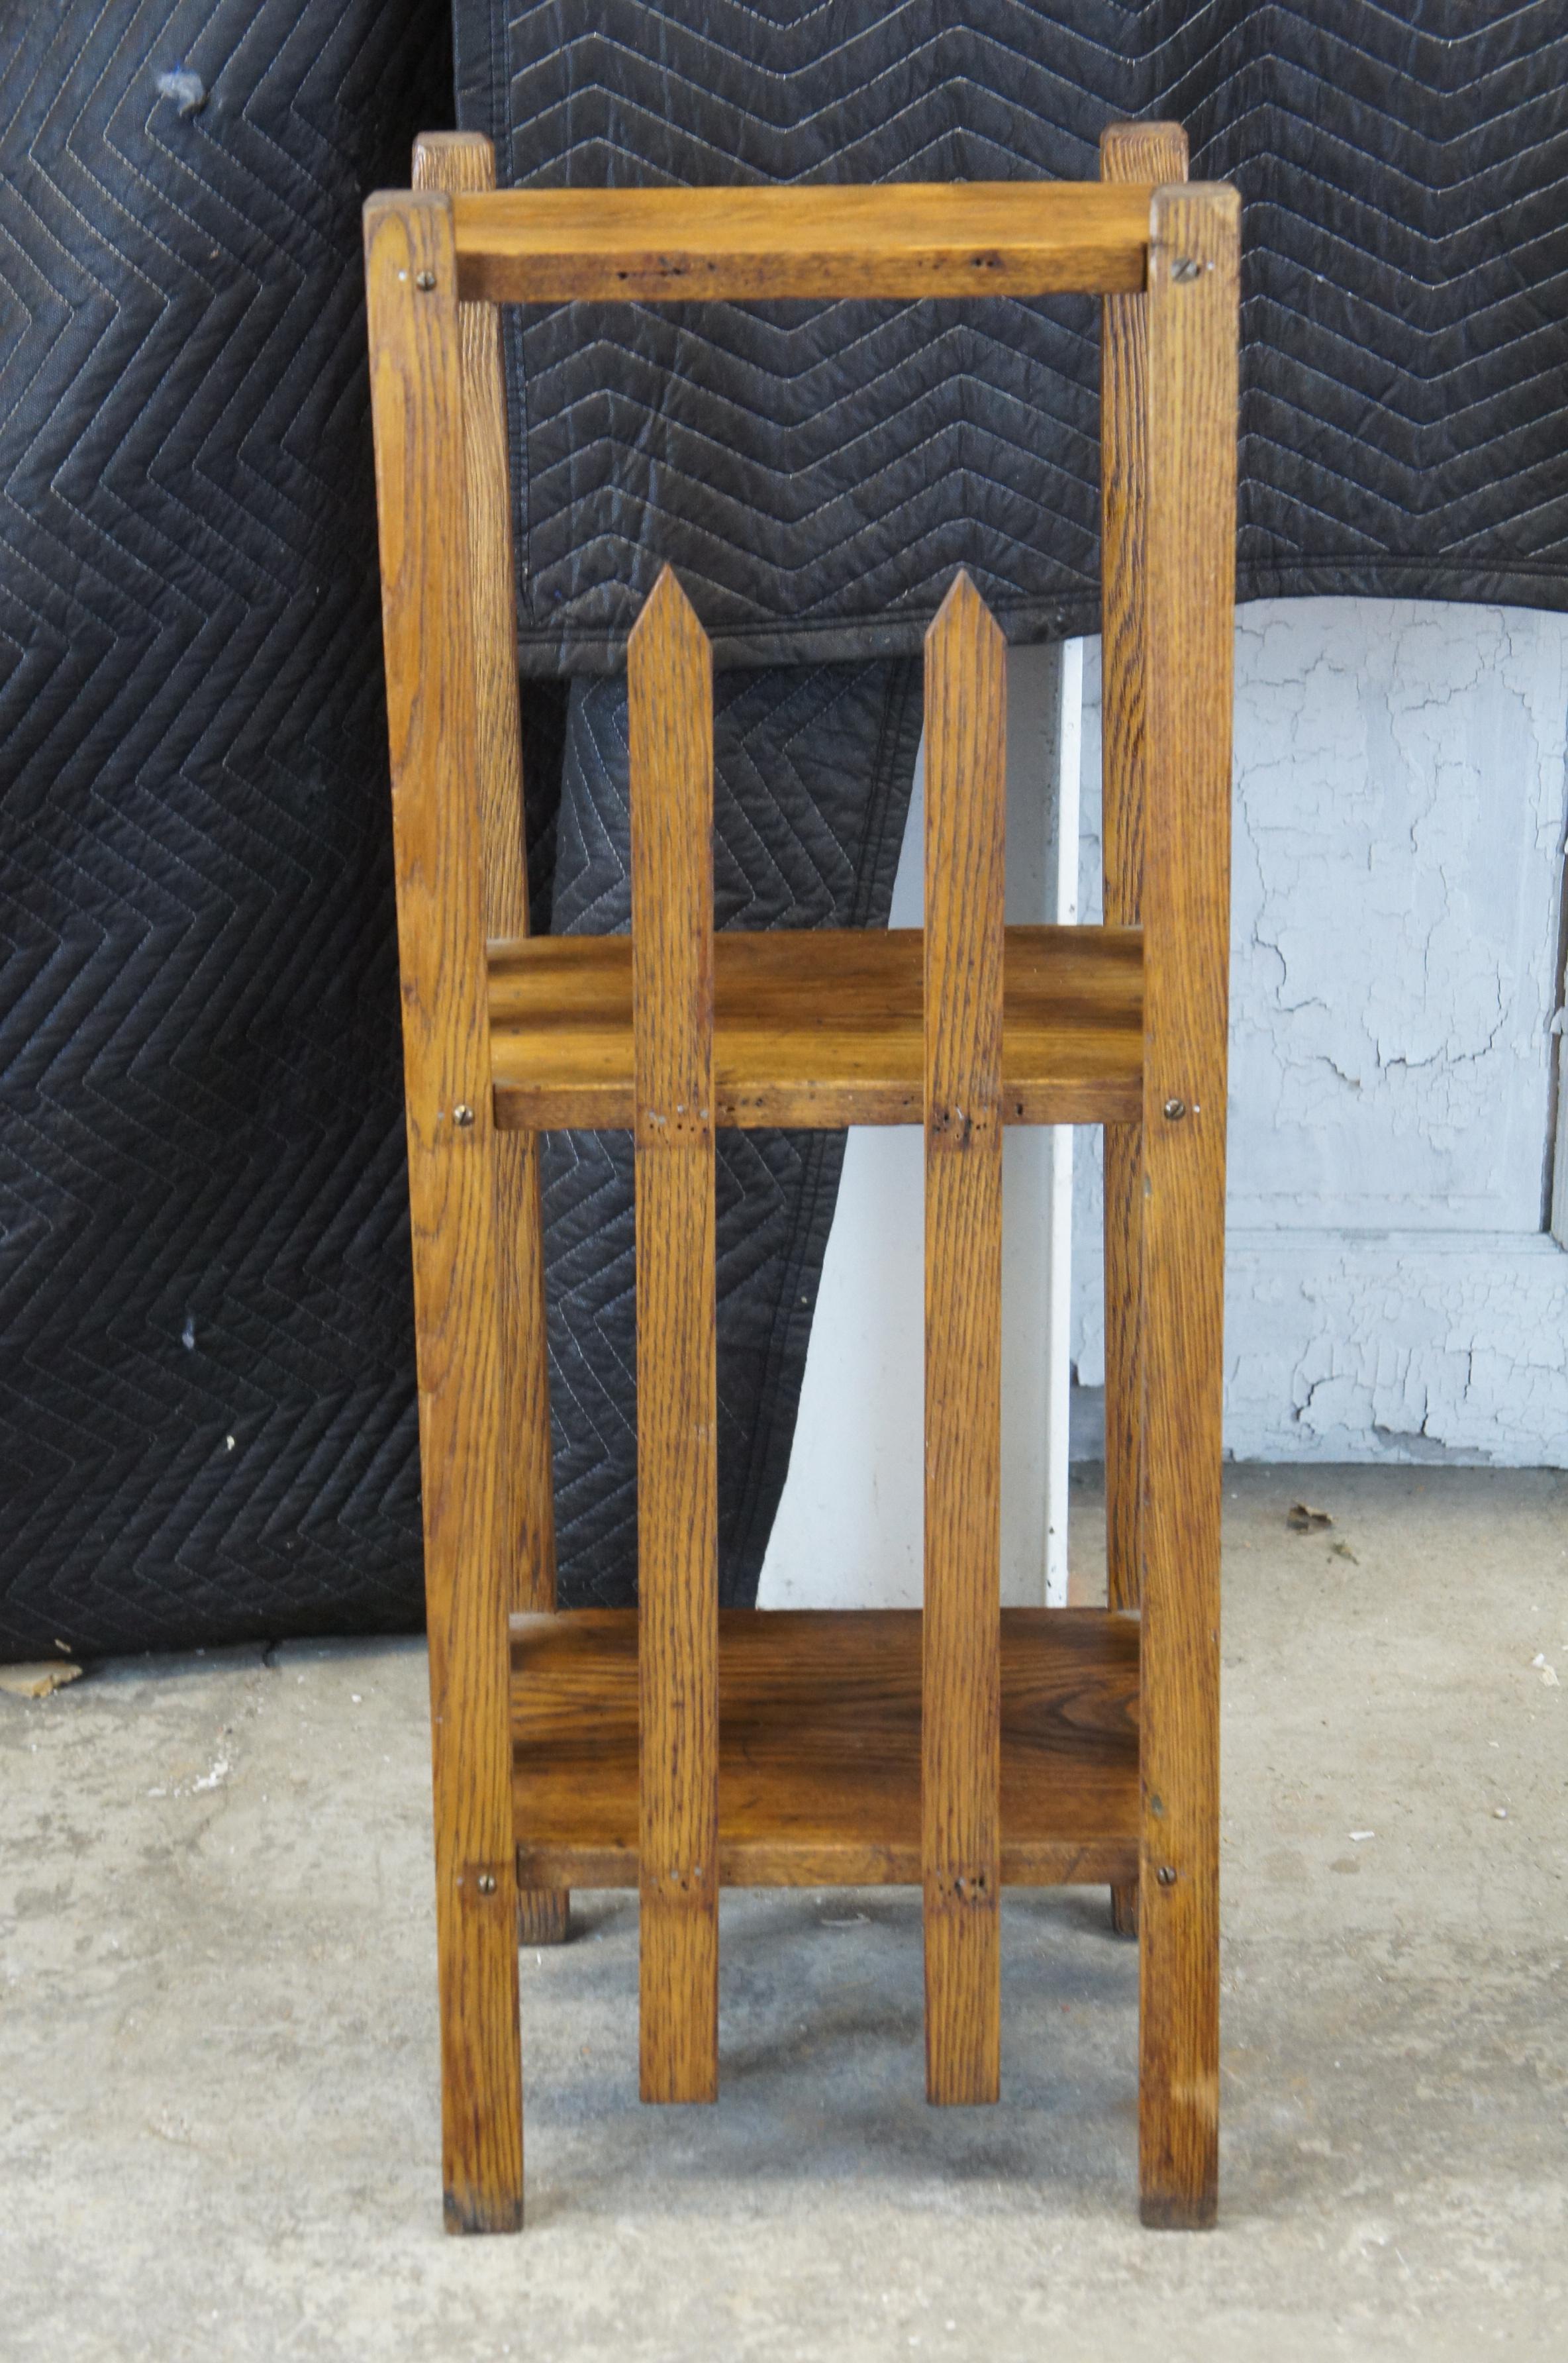 Mission Arts & Crafts Quartersawn Oak Bookshelf Pedestal Plant Stand Side Table In Good Condition For Sale In Dayton, OH